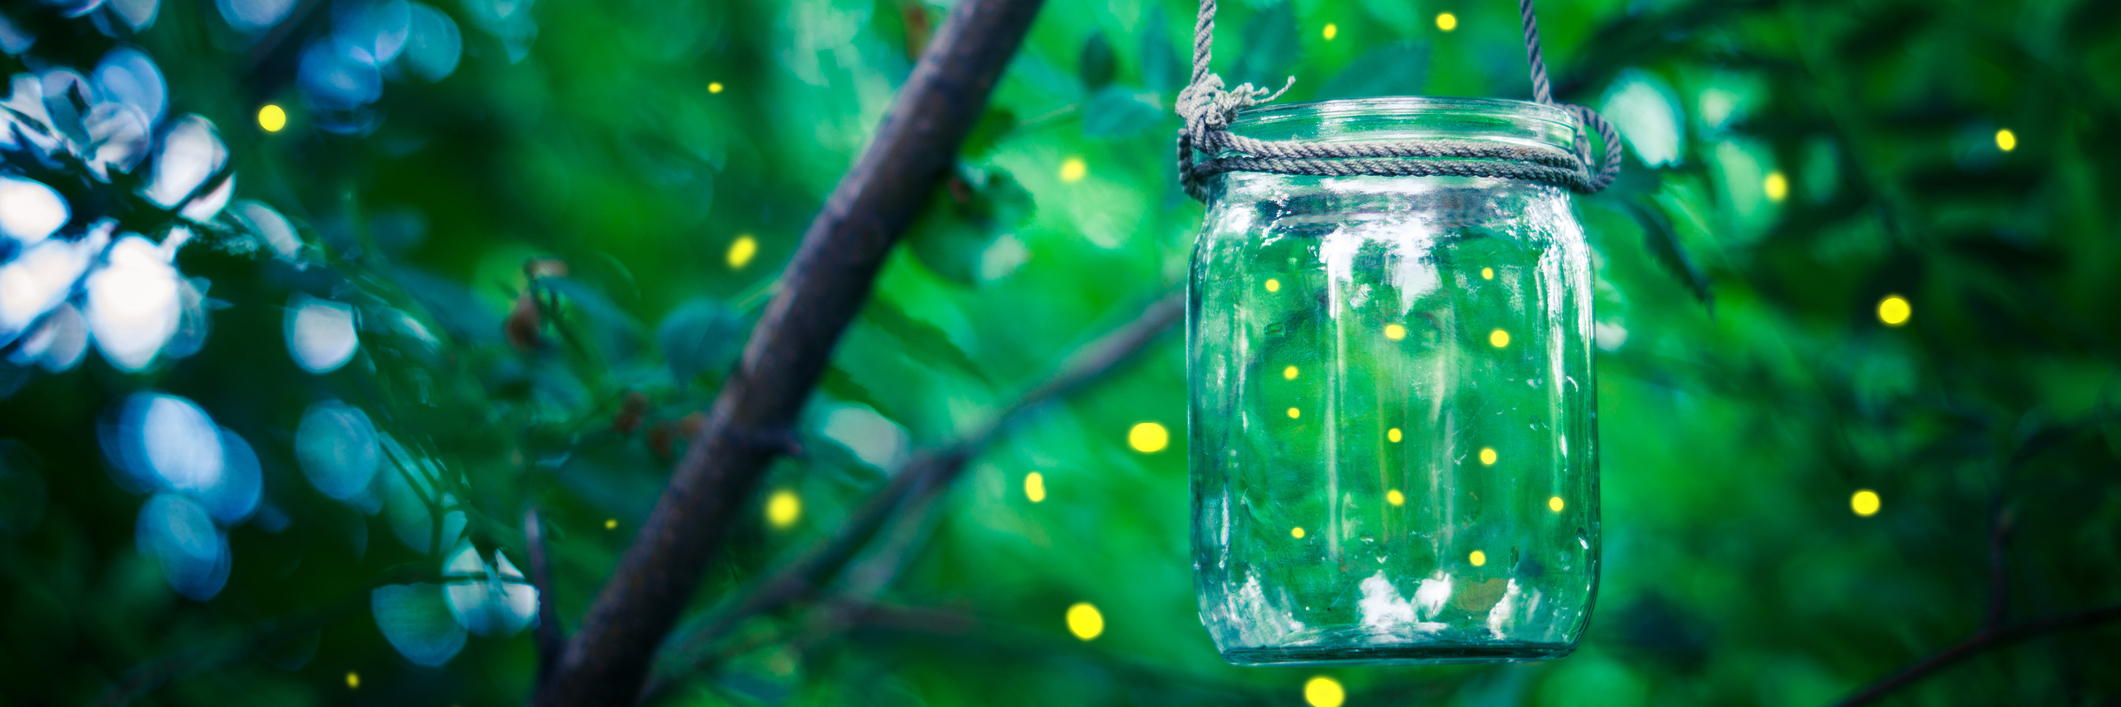 Fireflies flying around, some in a jar hanging off a tree branch.